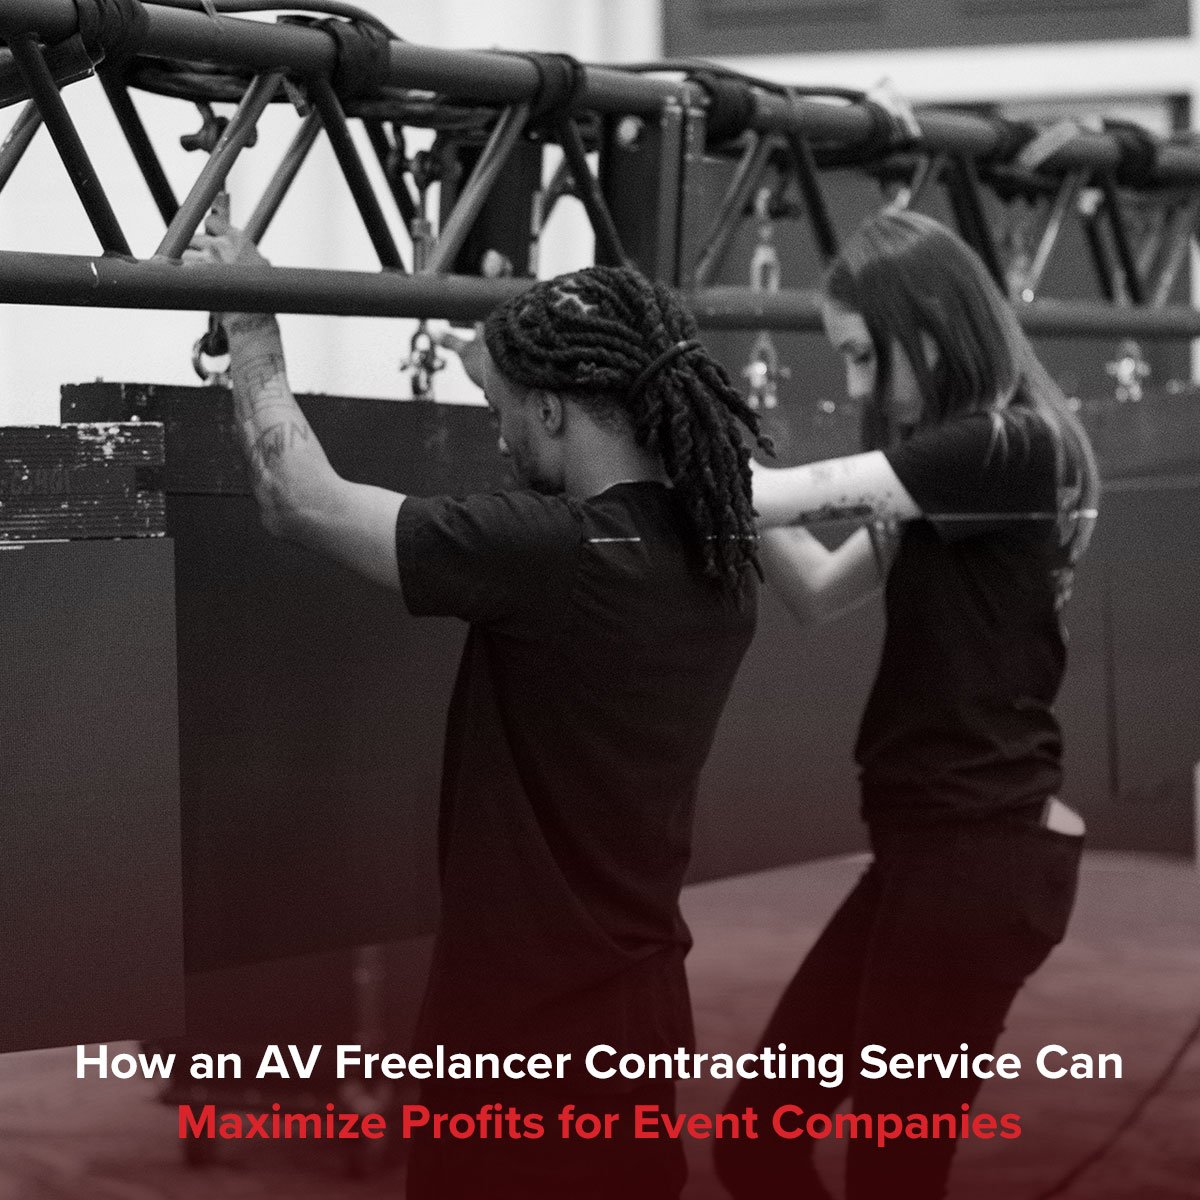 How an AV freelancer contracting service maximizes profits for event companies